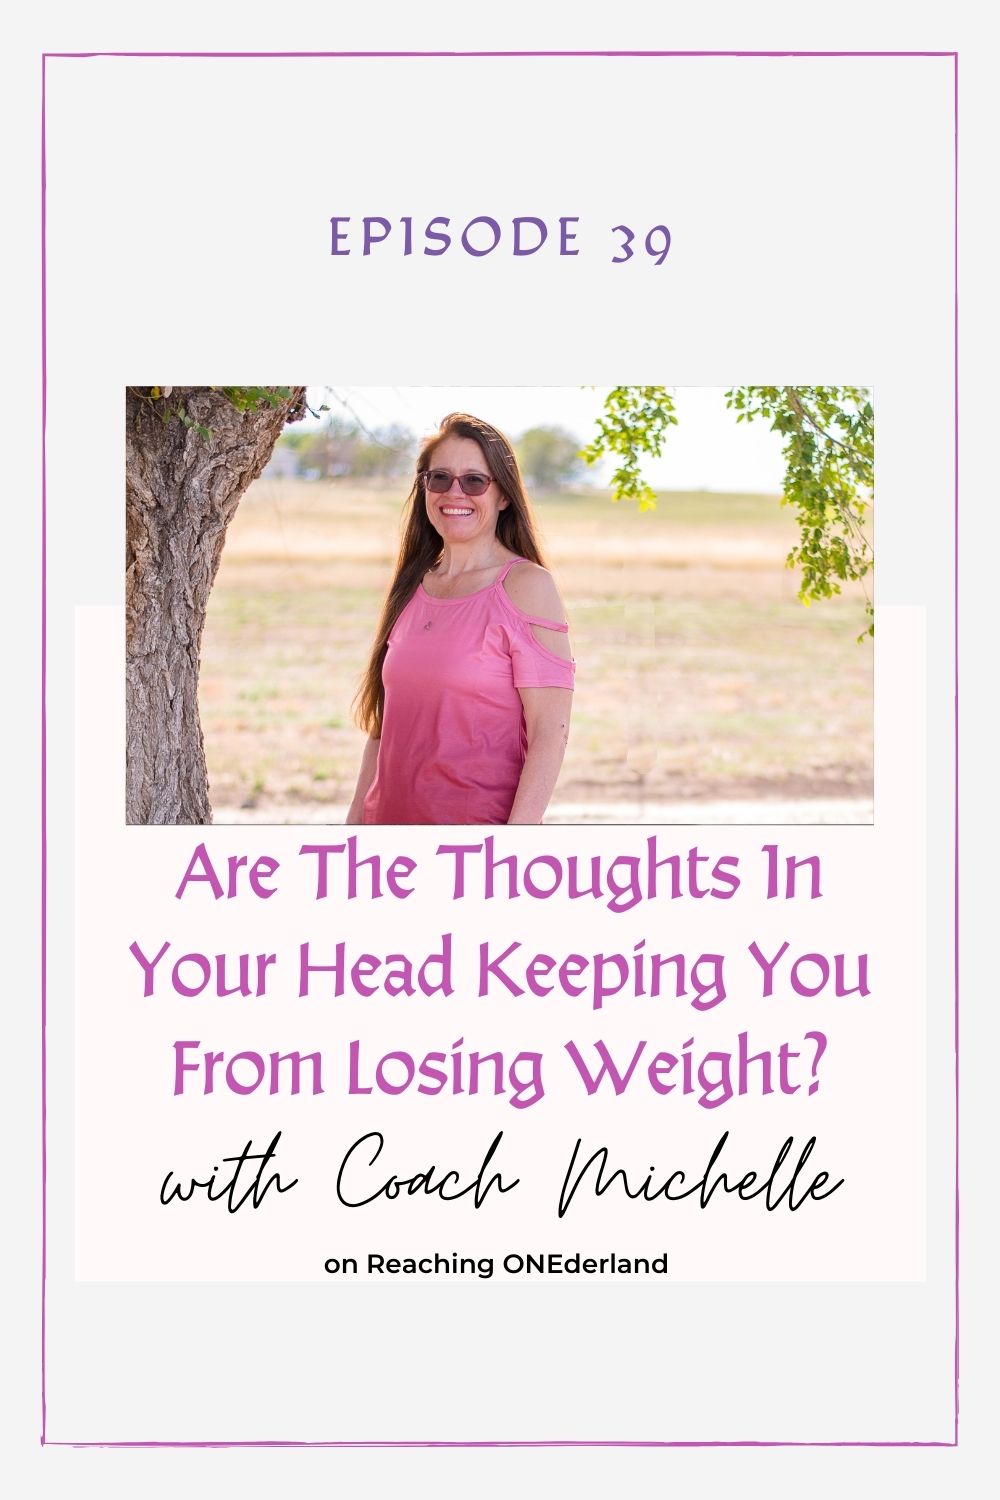 Are The Thoughts In Your Head Keeping You From Losing Weight?